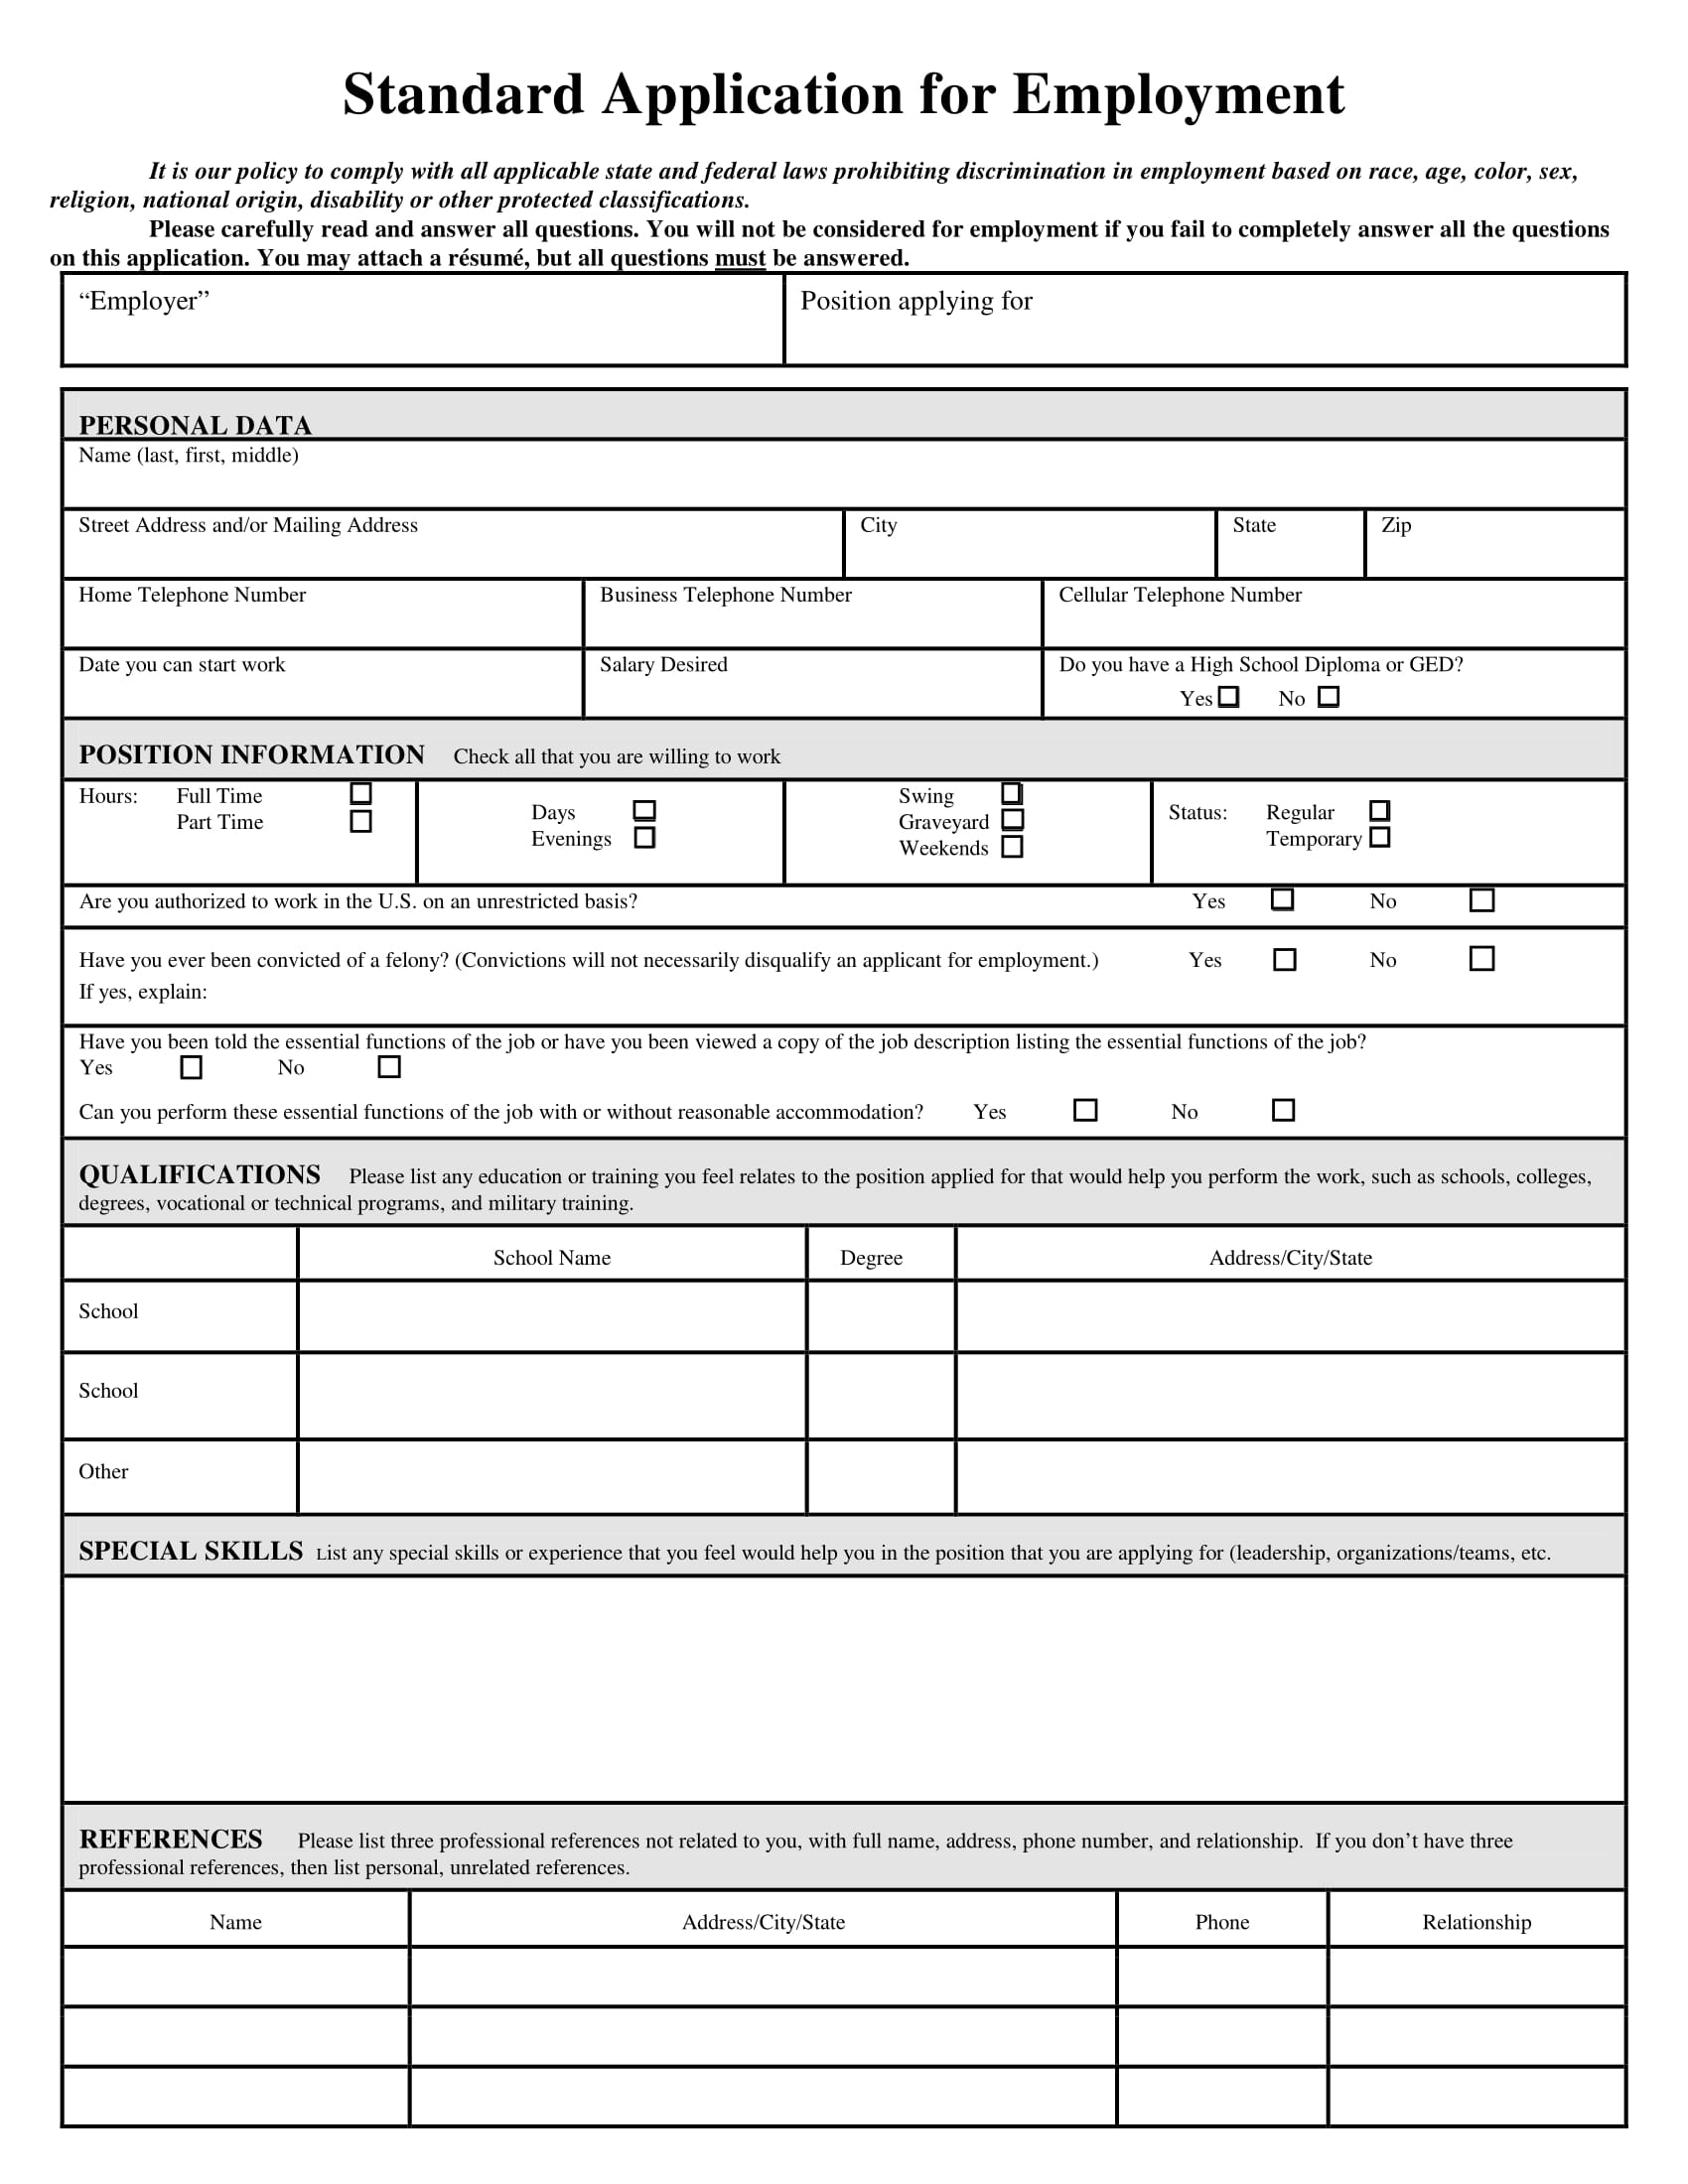 standard application for employment form example